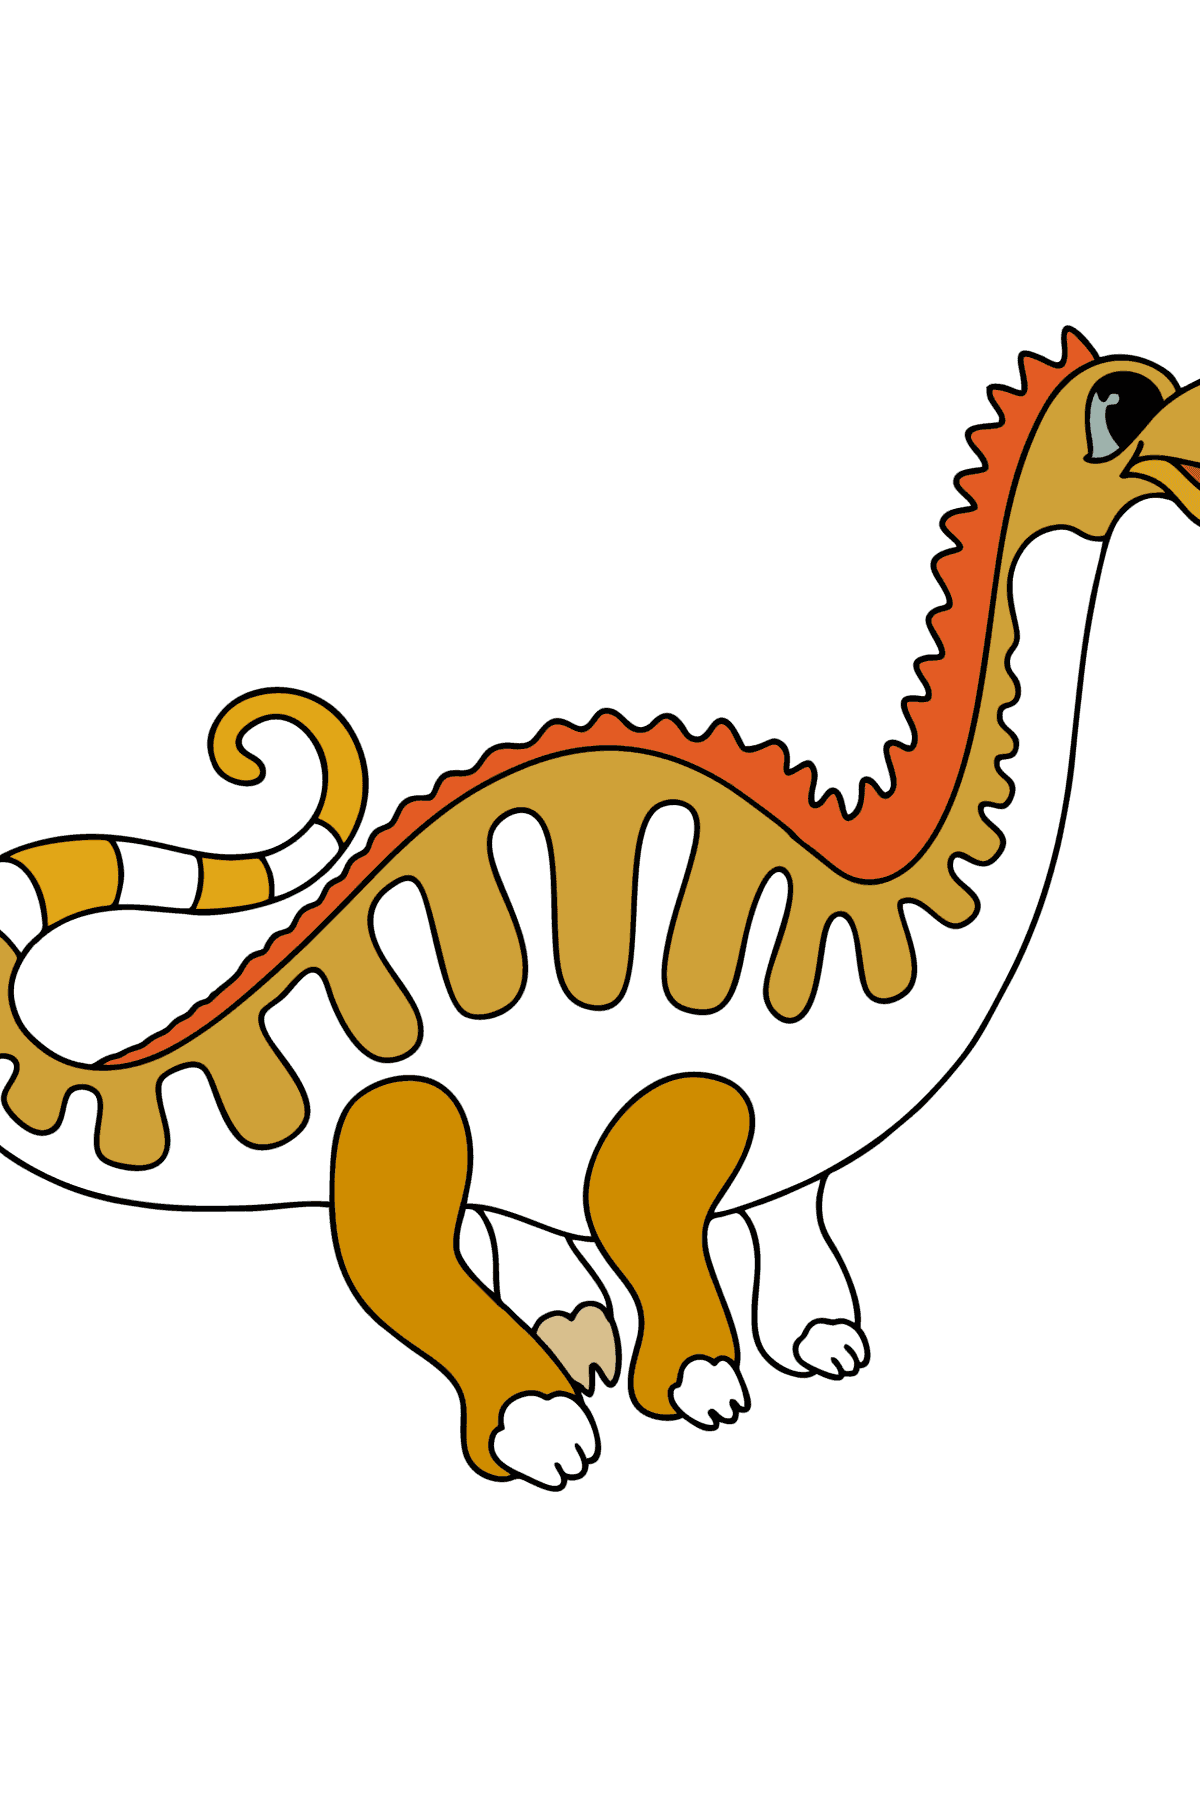 Apatosaurus coloring page - Coloring Pages for Kids